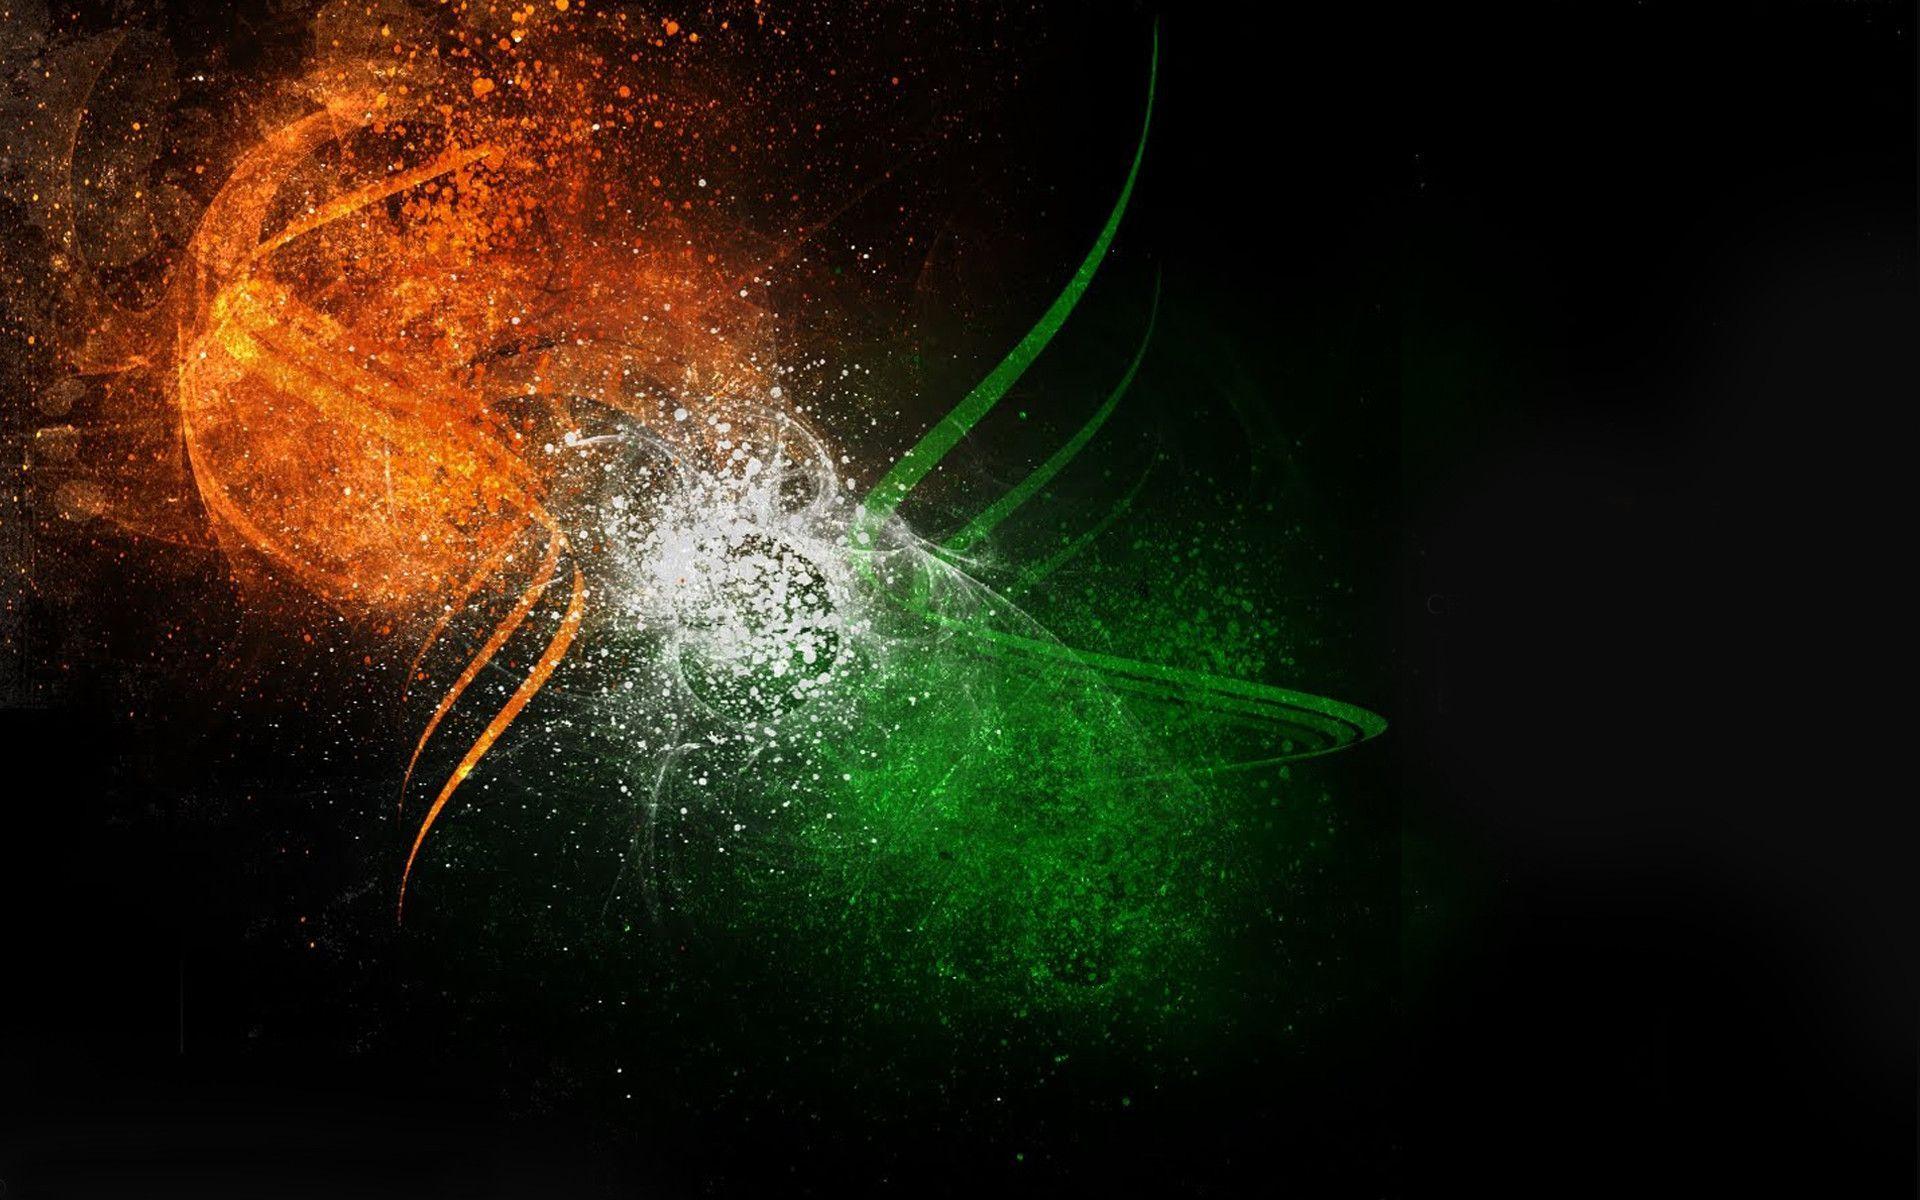 Indian Flag Wallpapers Top Free Indian Flag Backgrounds Wallpaperaccess